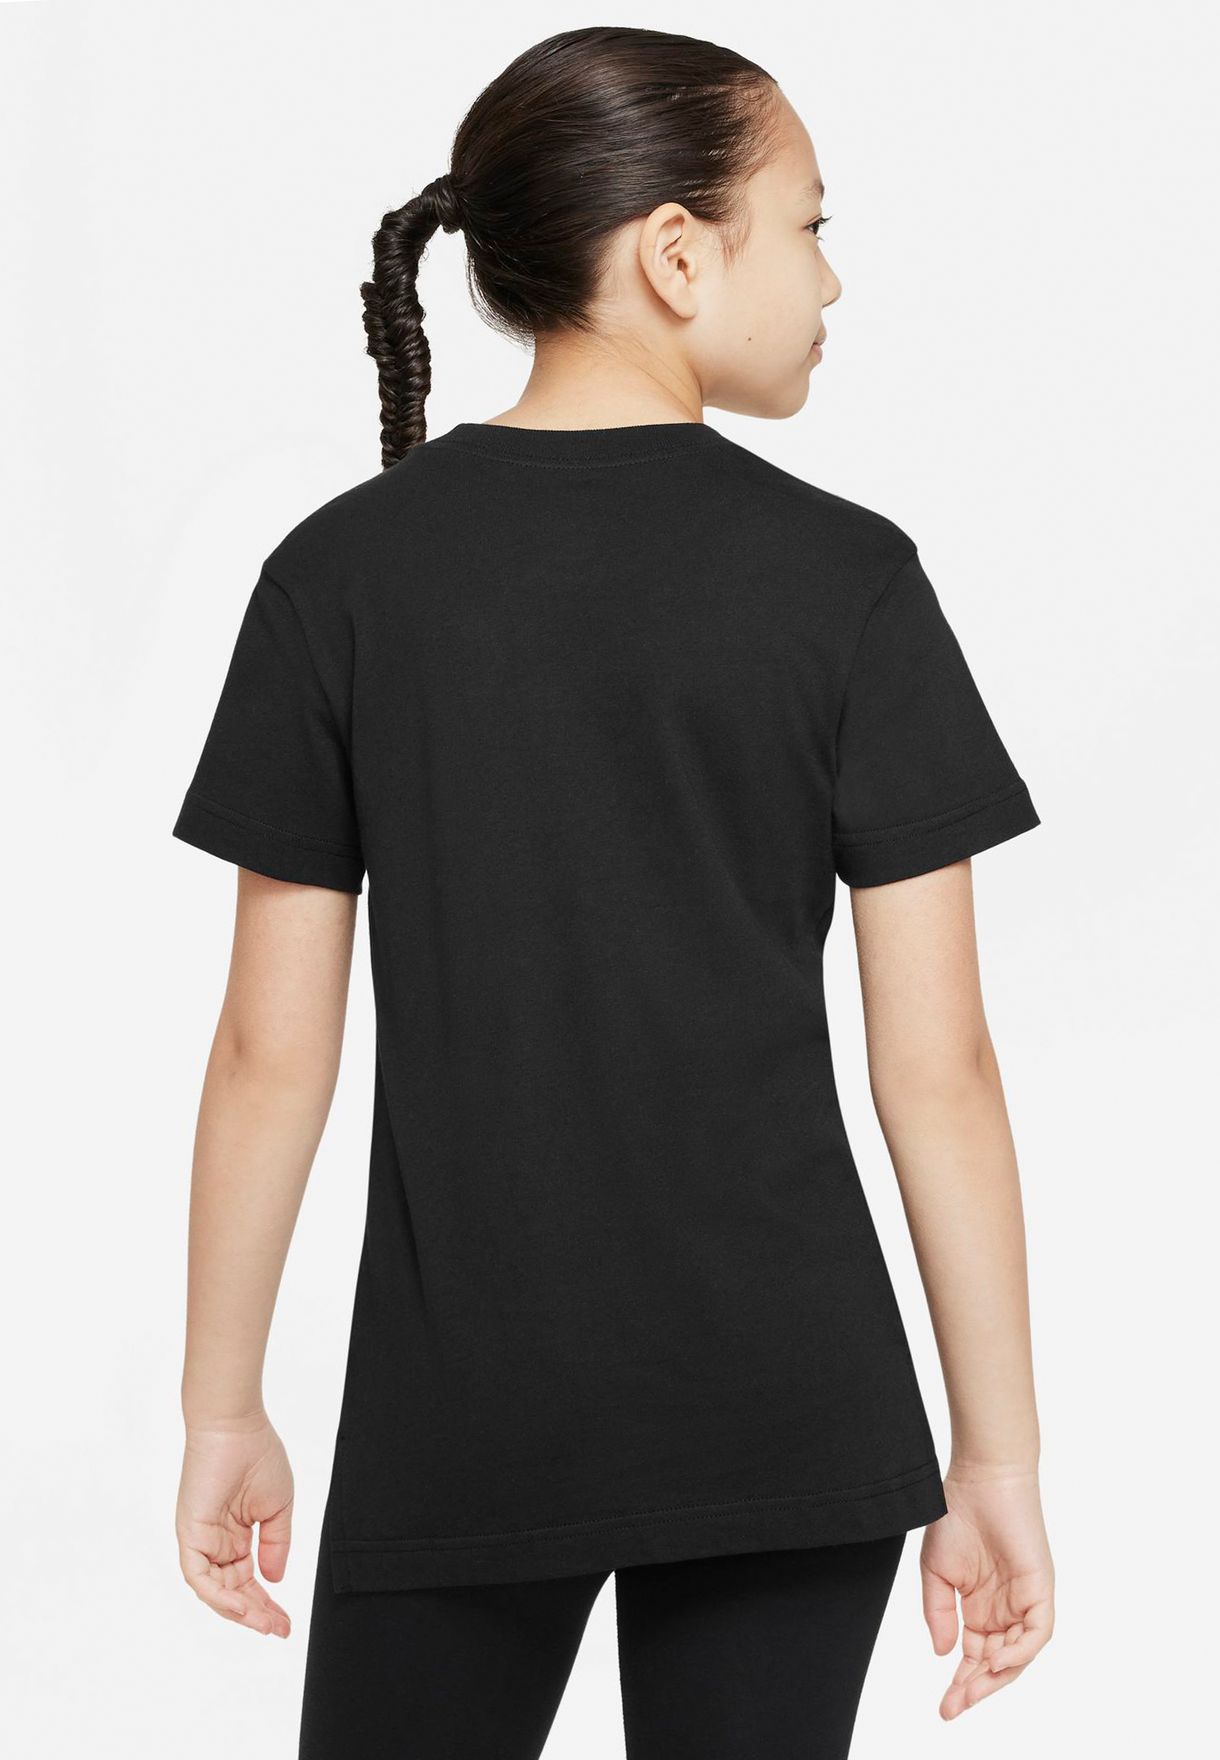 Youth Nsw Hilo Craft T-Shirt